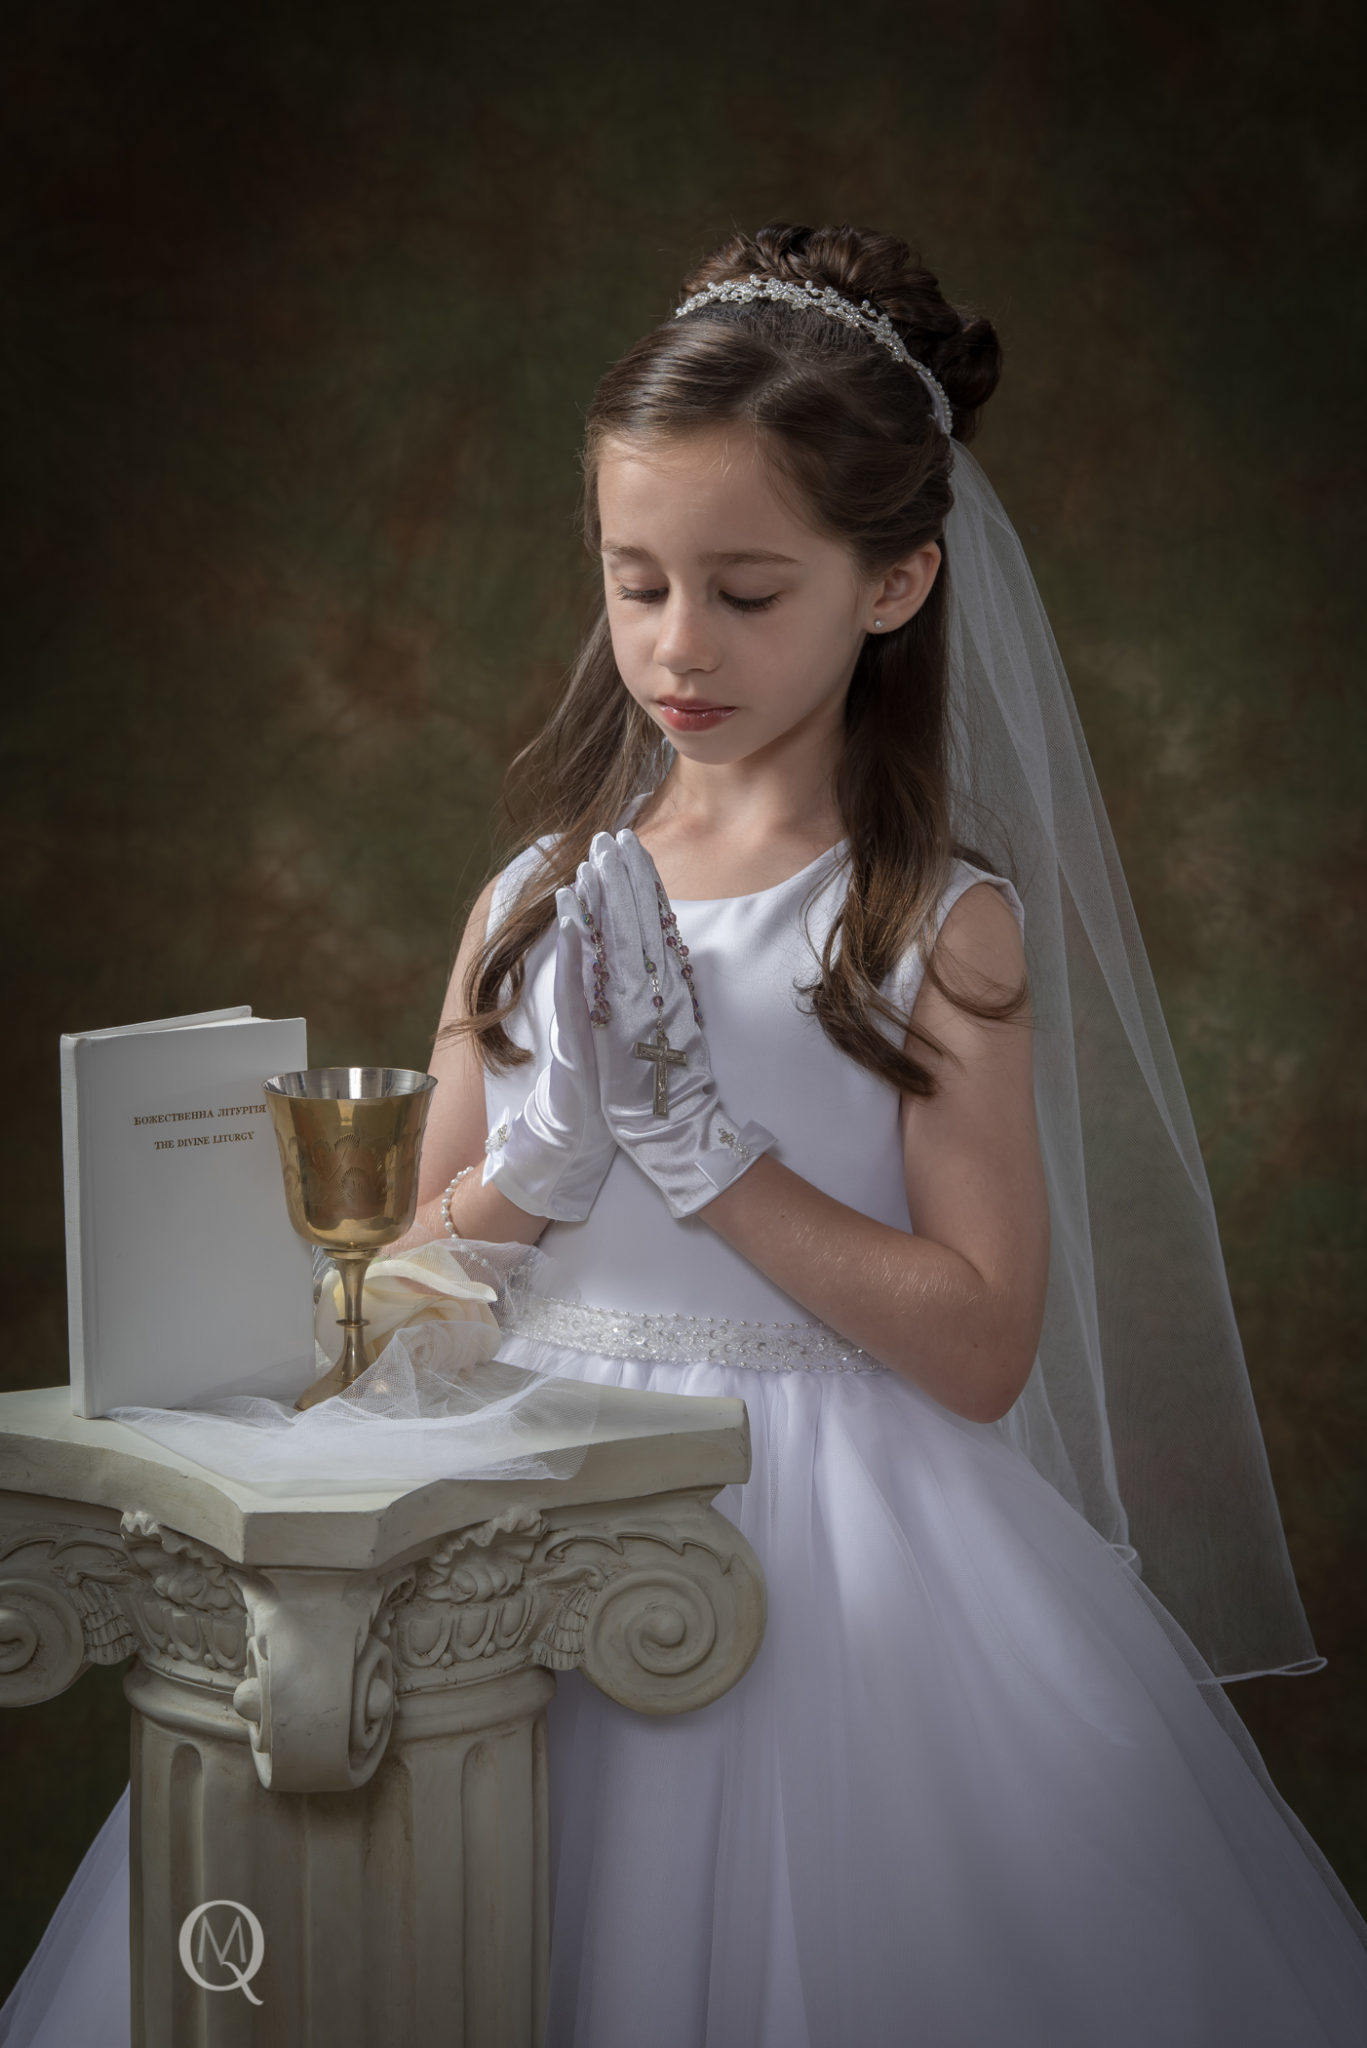 First Communion Photographer in South Jersey – Family Photographer in ...